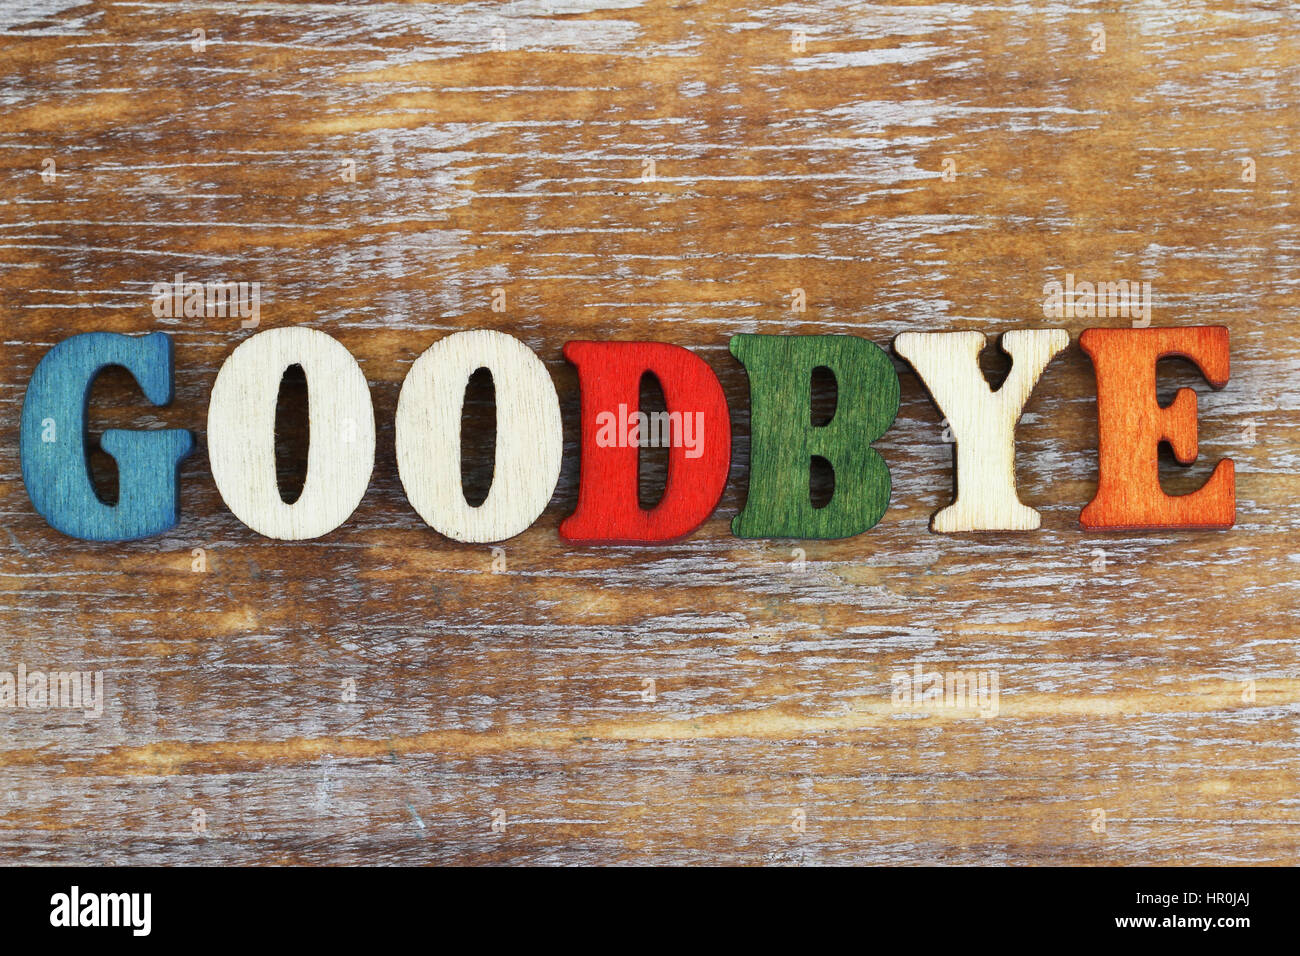 Goodbye written with colorful letters on rustic wooden surface Stock Photo